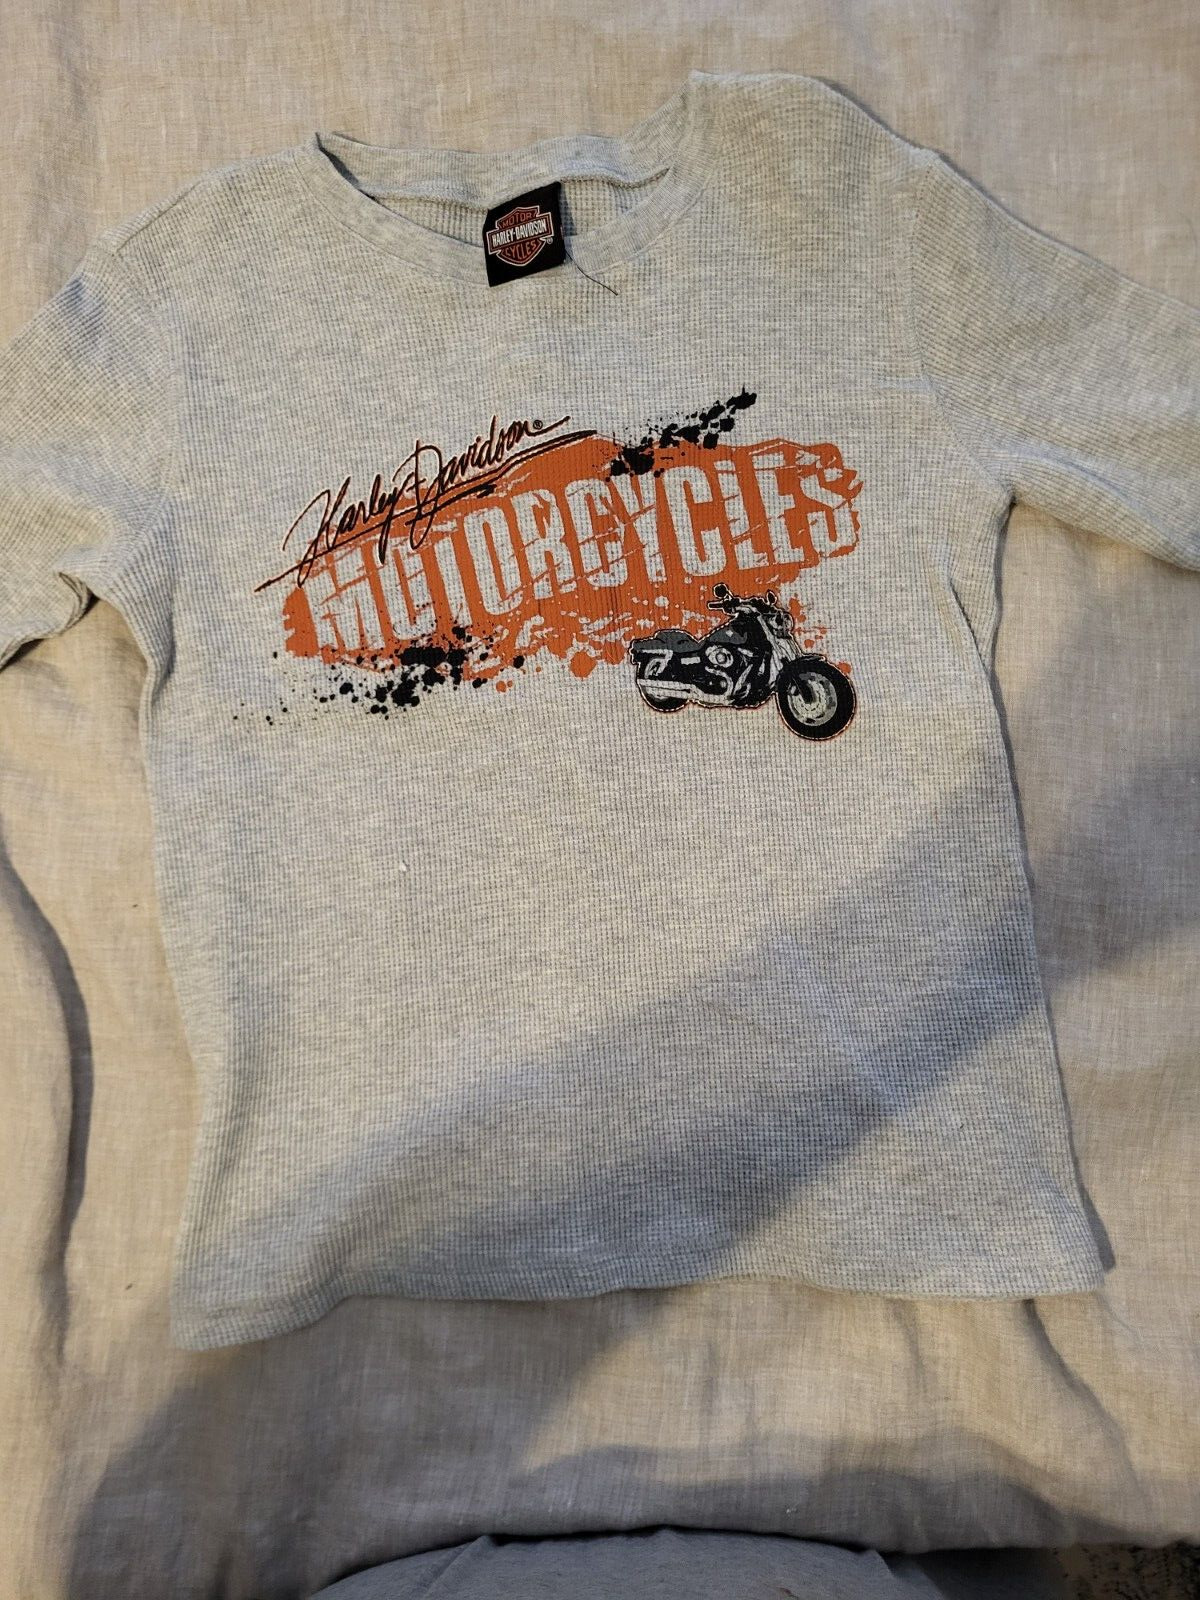 Harley Davidson WOMEN'S SIZE M 10/12 LG SLEEVE OFFICIAL GEAR EXCELLENT CONDITION